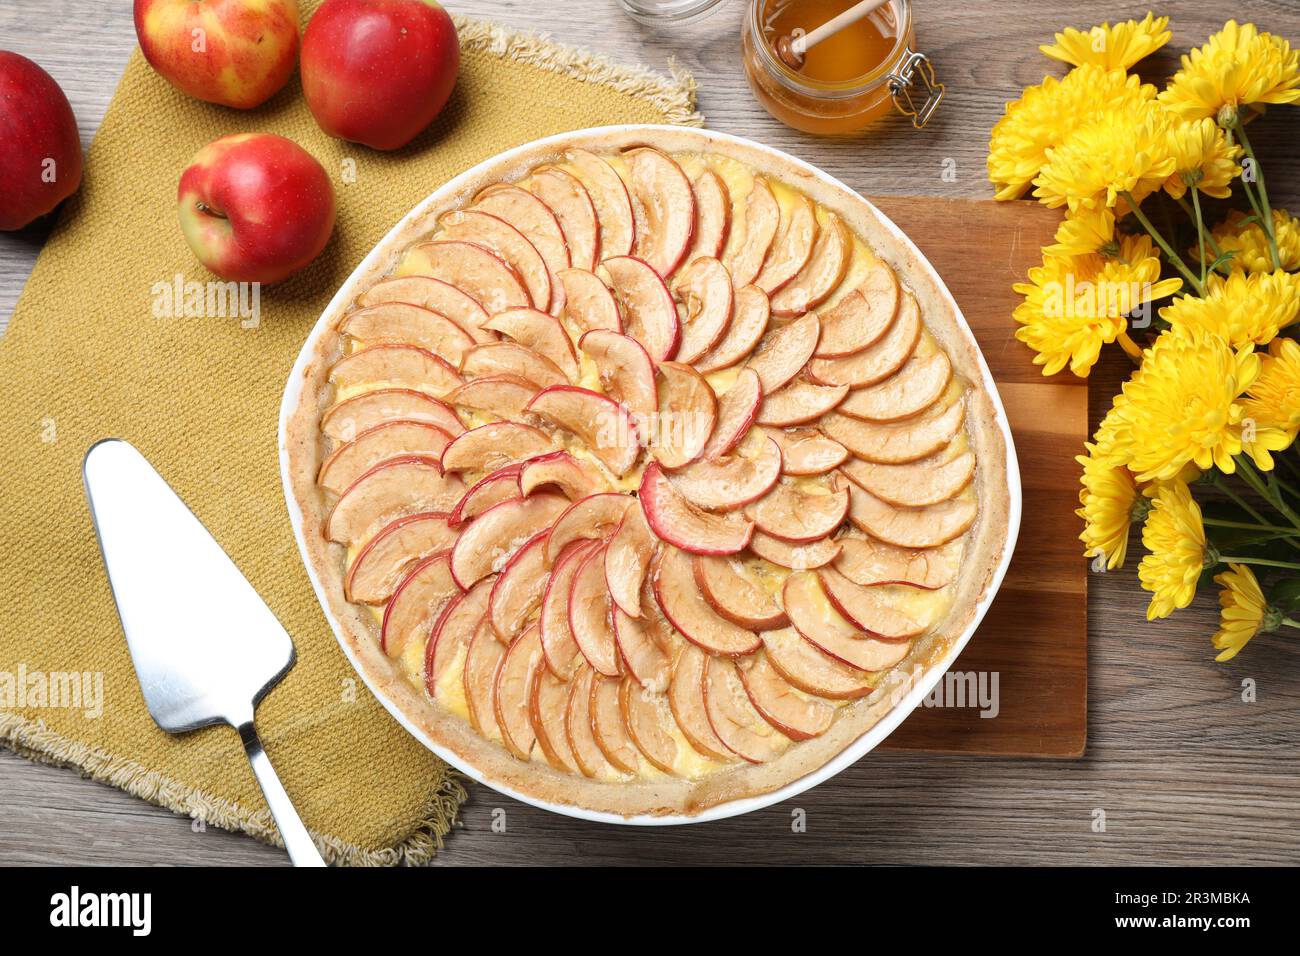 Flat lay composition with tasty apple pie on wooden table Stock Photo